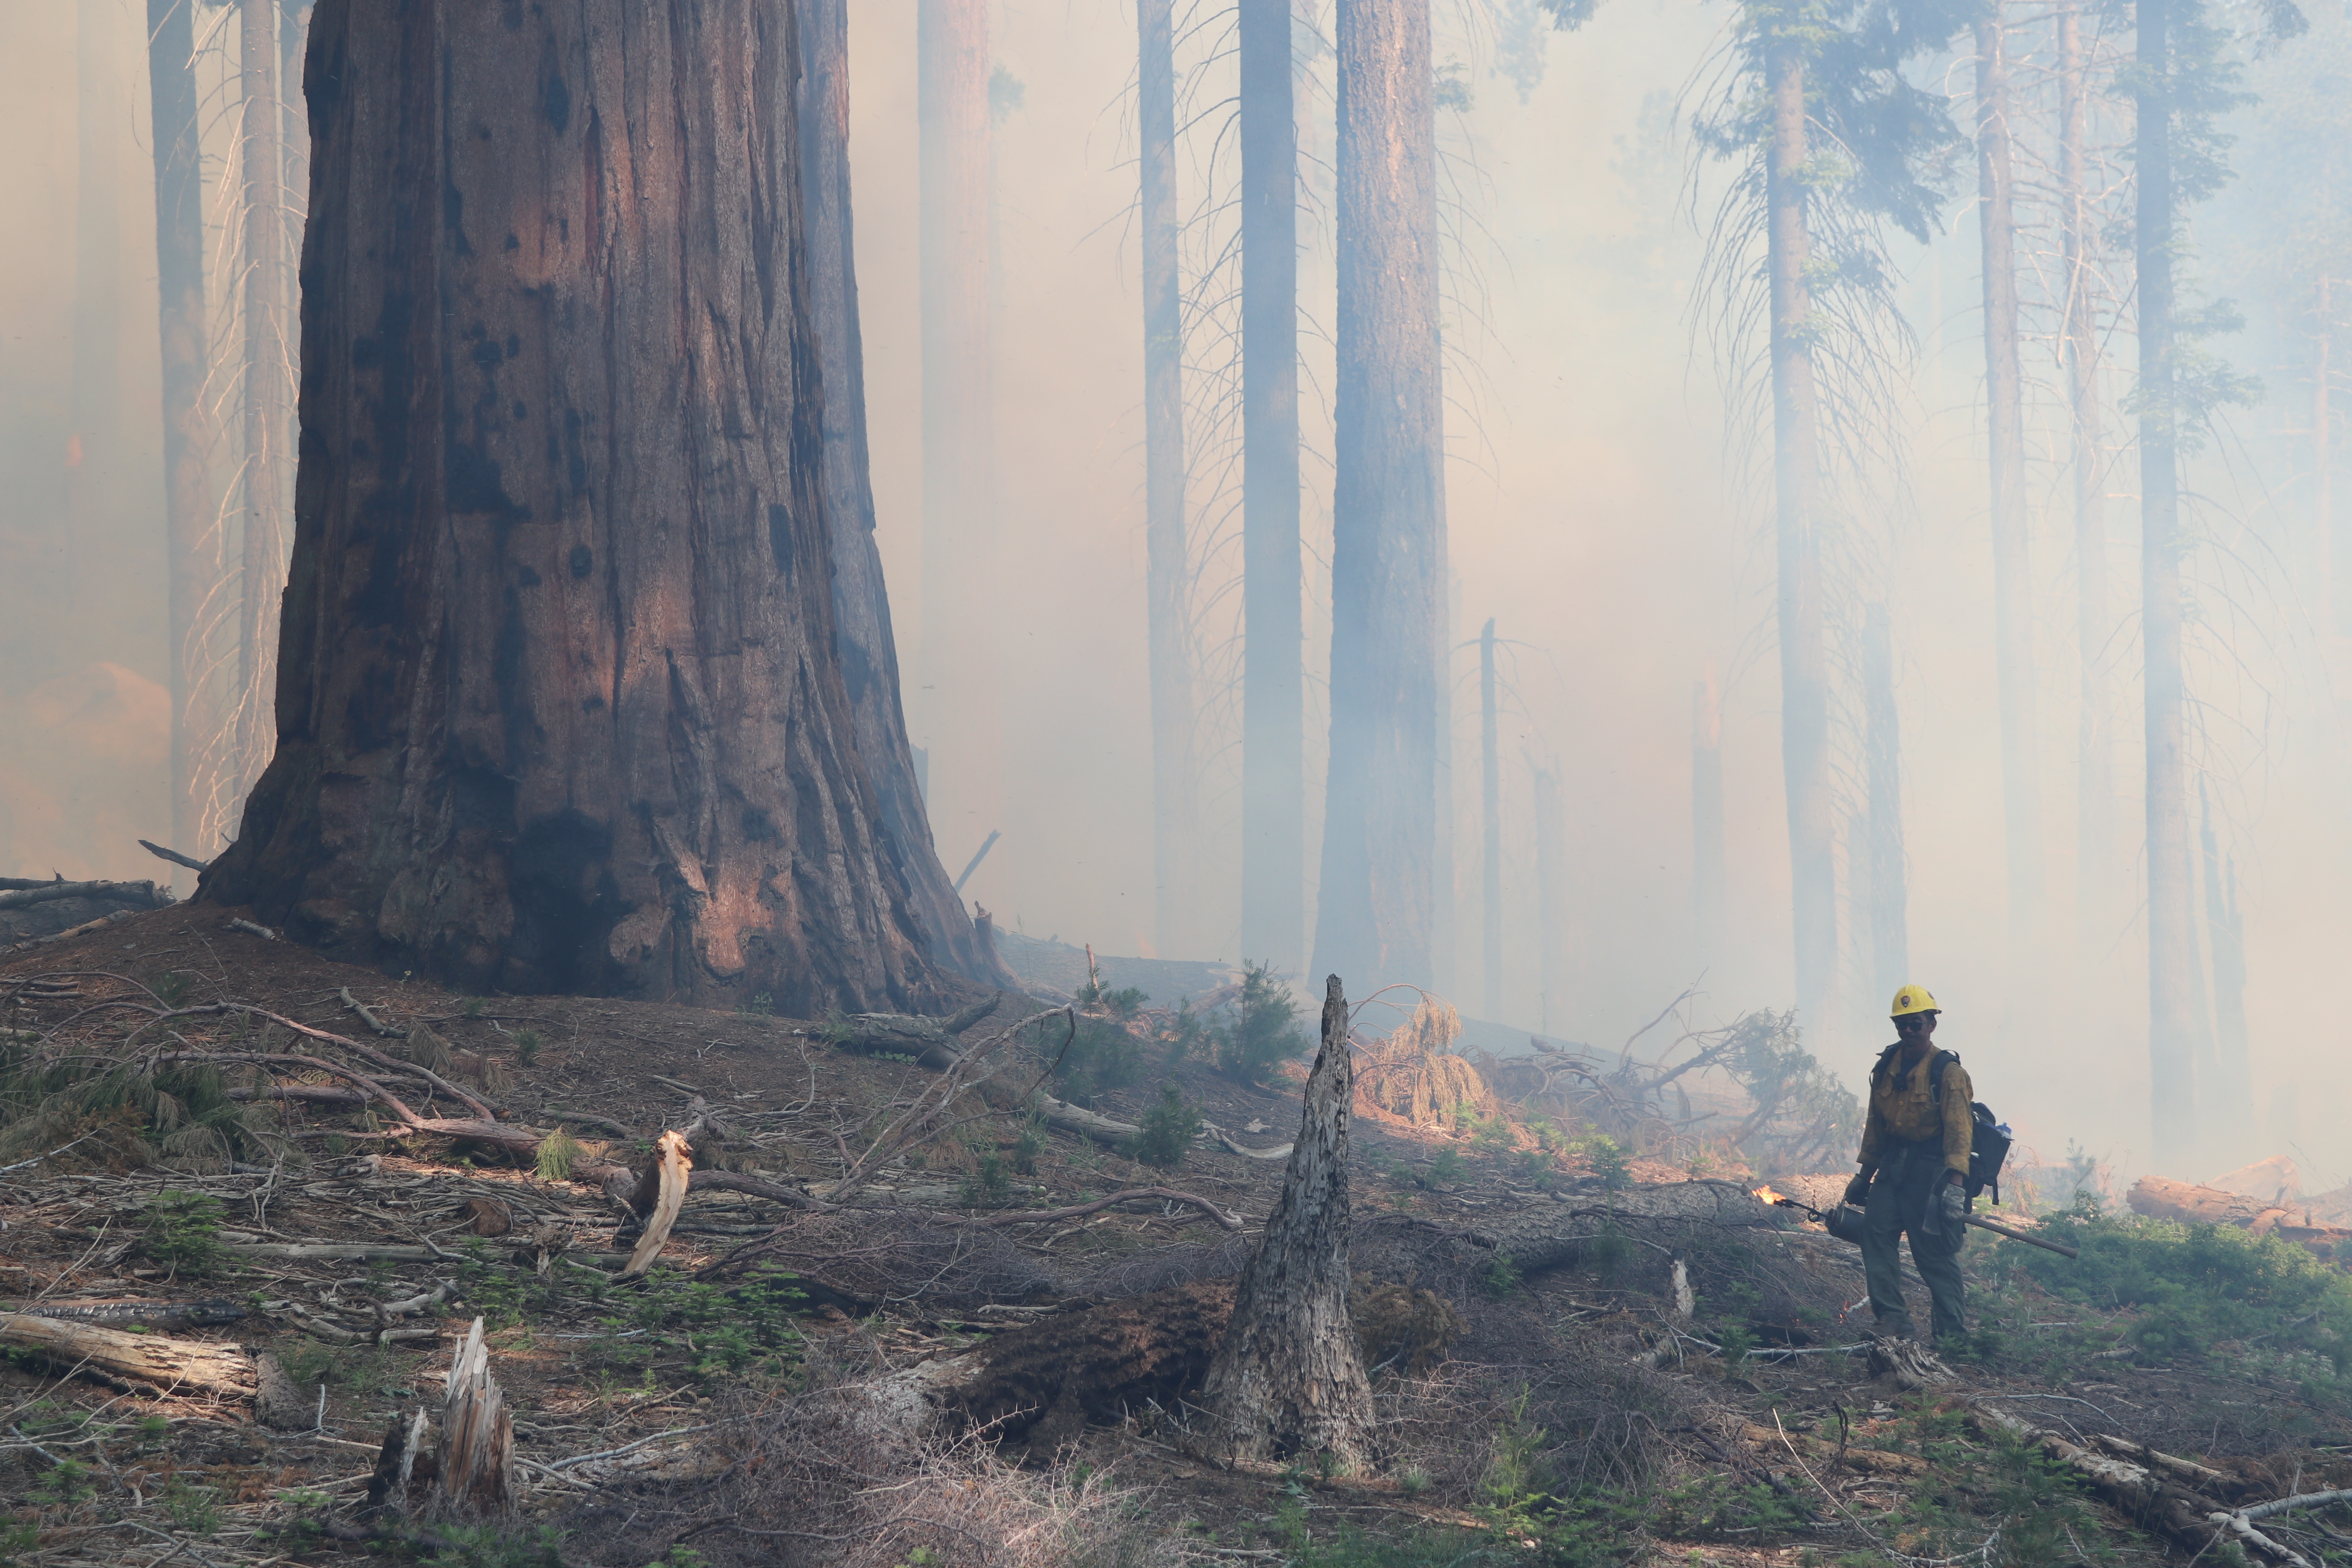 Fire manager stands beneath towering sequoia trees during a prescribed burn